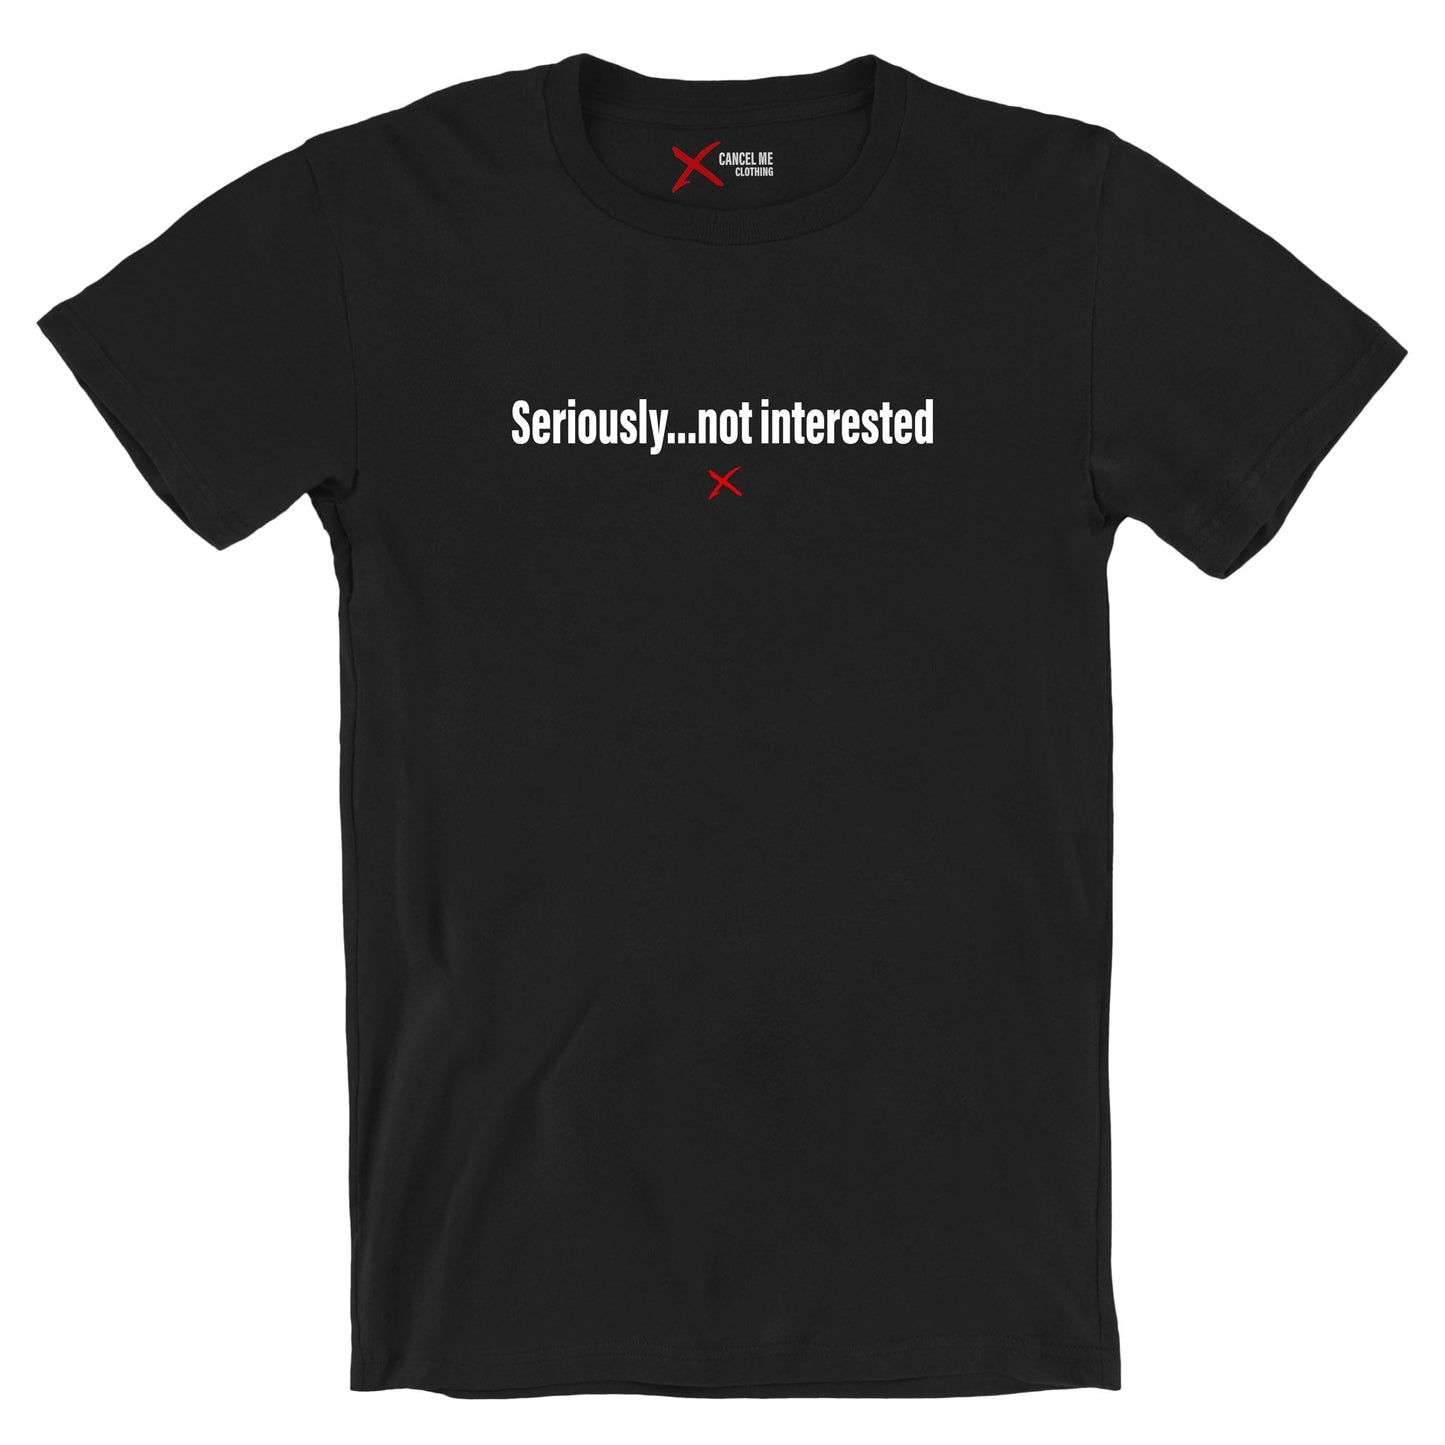 Seriously...not interested - Shirt